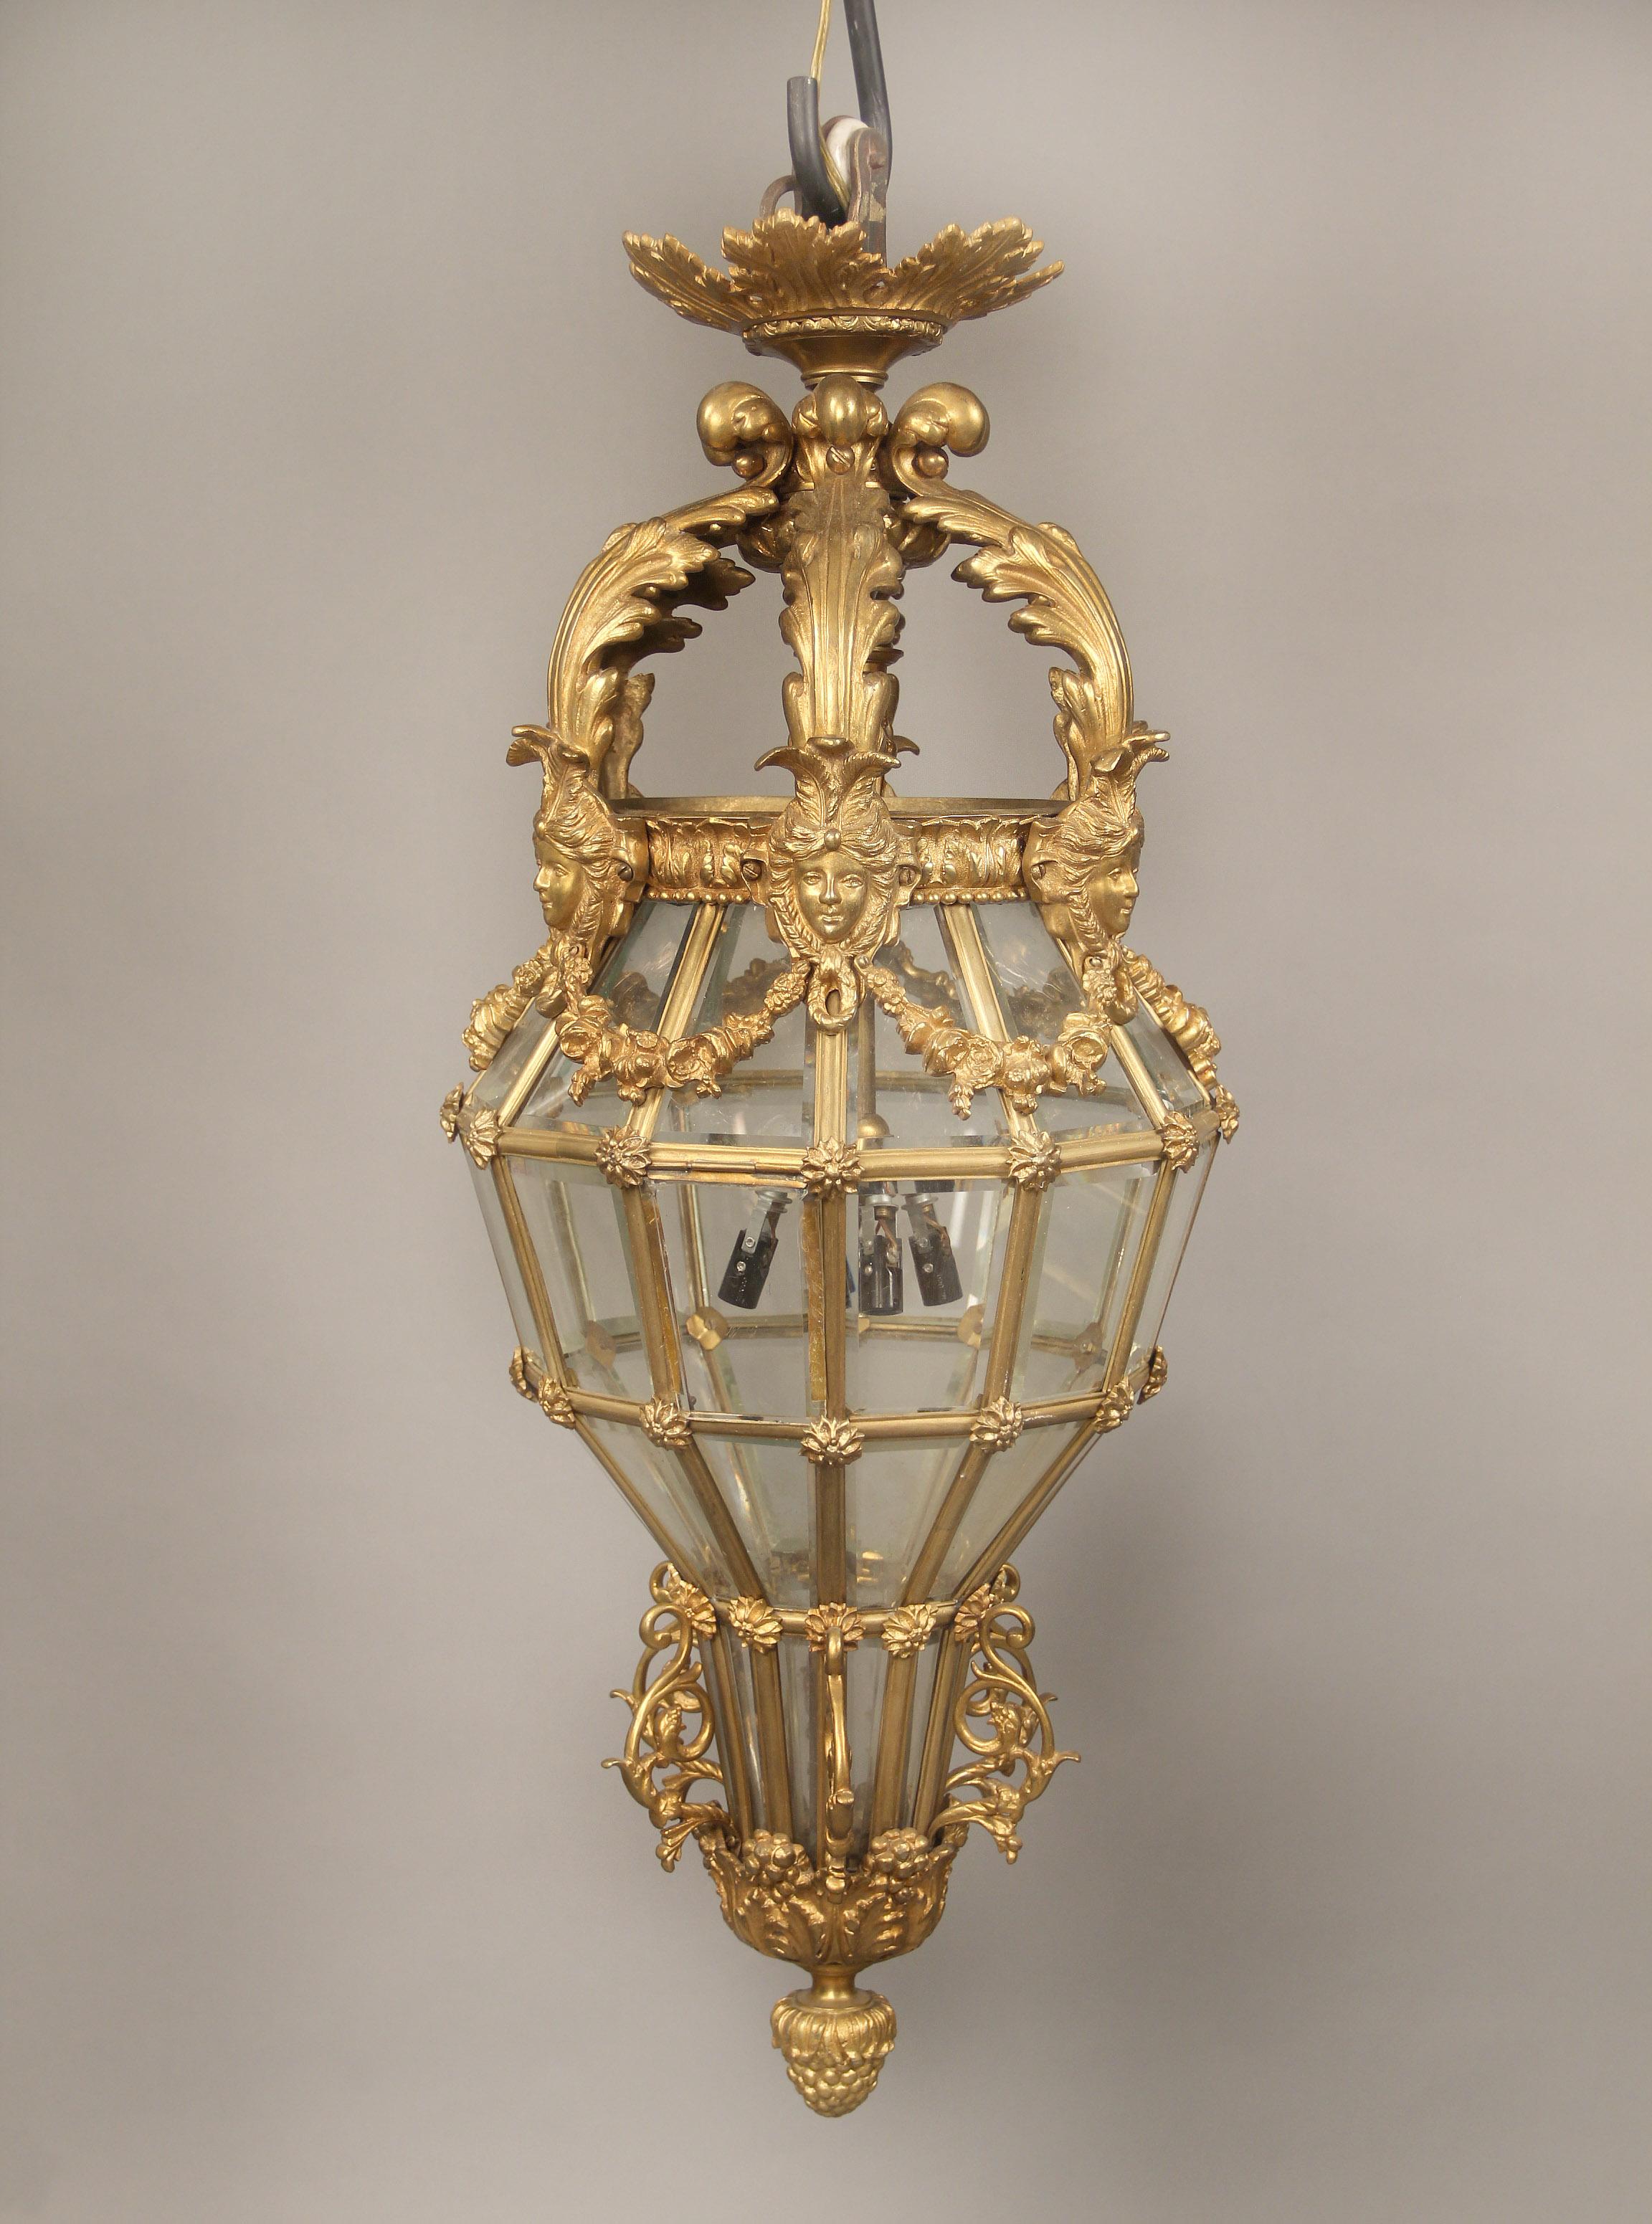 A Fine Late 19th Century Gilt Bronze Figural Lantern

The domed top with six female masks attached with floral swags, above a long shaped body leading to a finished bottom with fruits and an acorn, four interior lights.